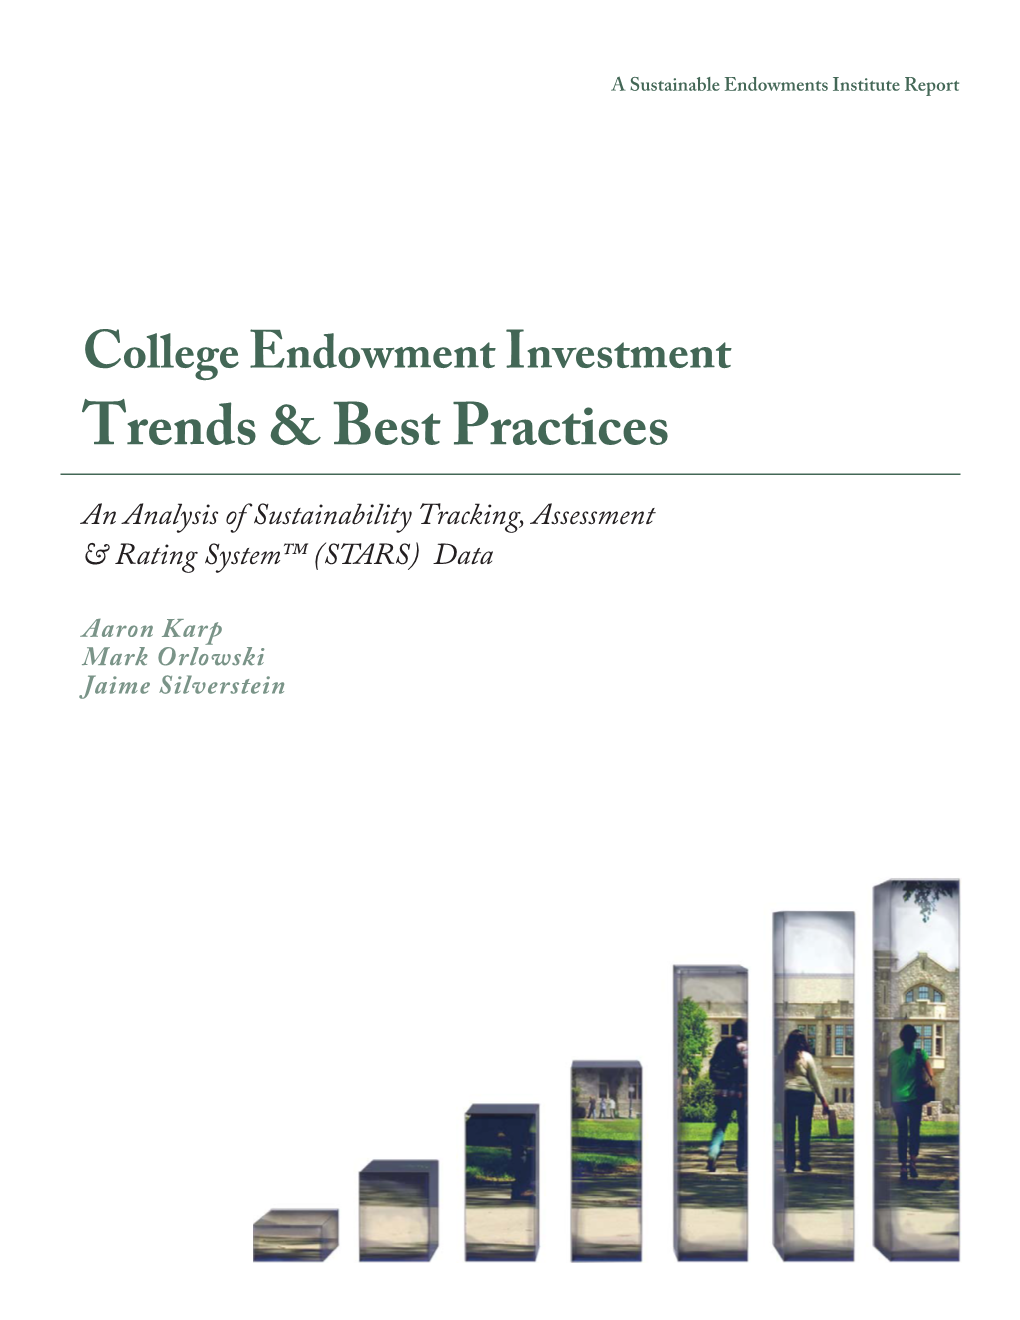 College Endowment Investment Trends and Best Practices: an Analysis of Sustainability Tracking, Assessment & Rating System (STARS)™ Data